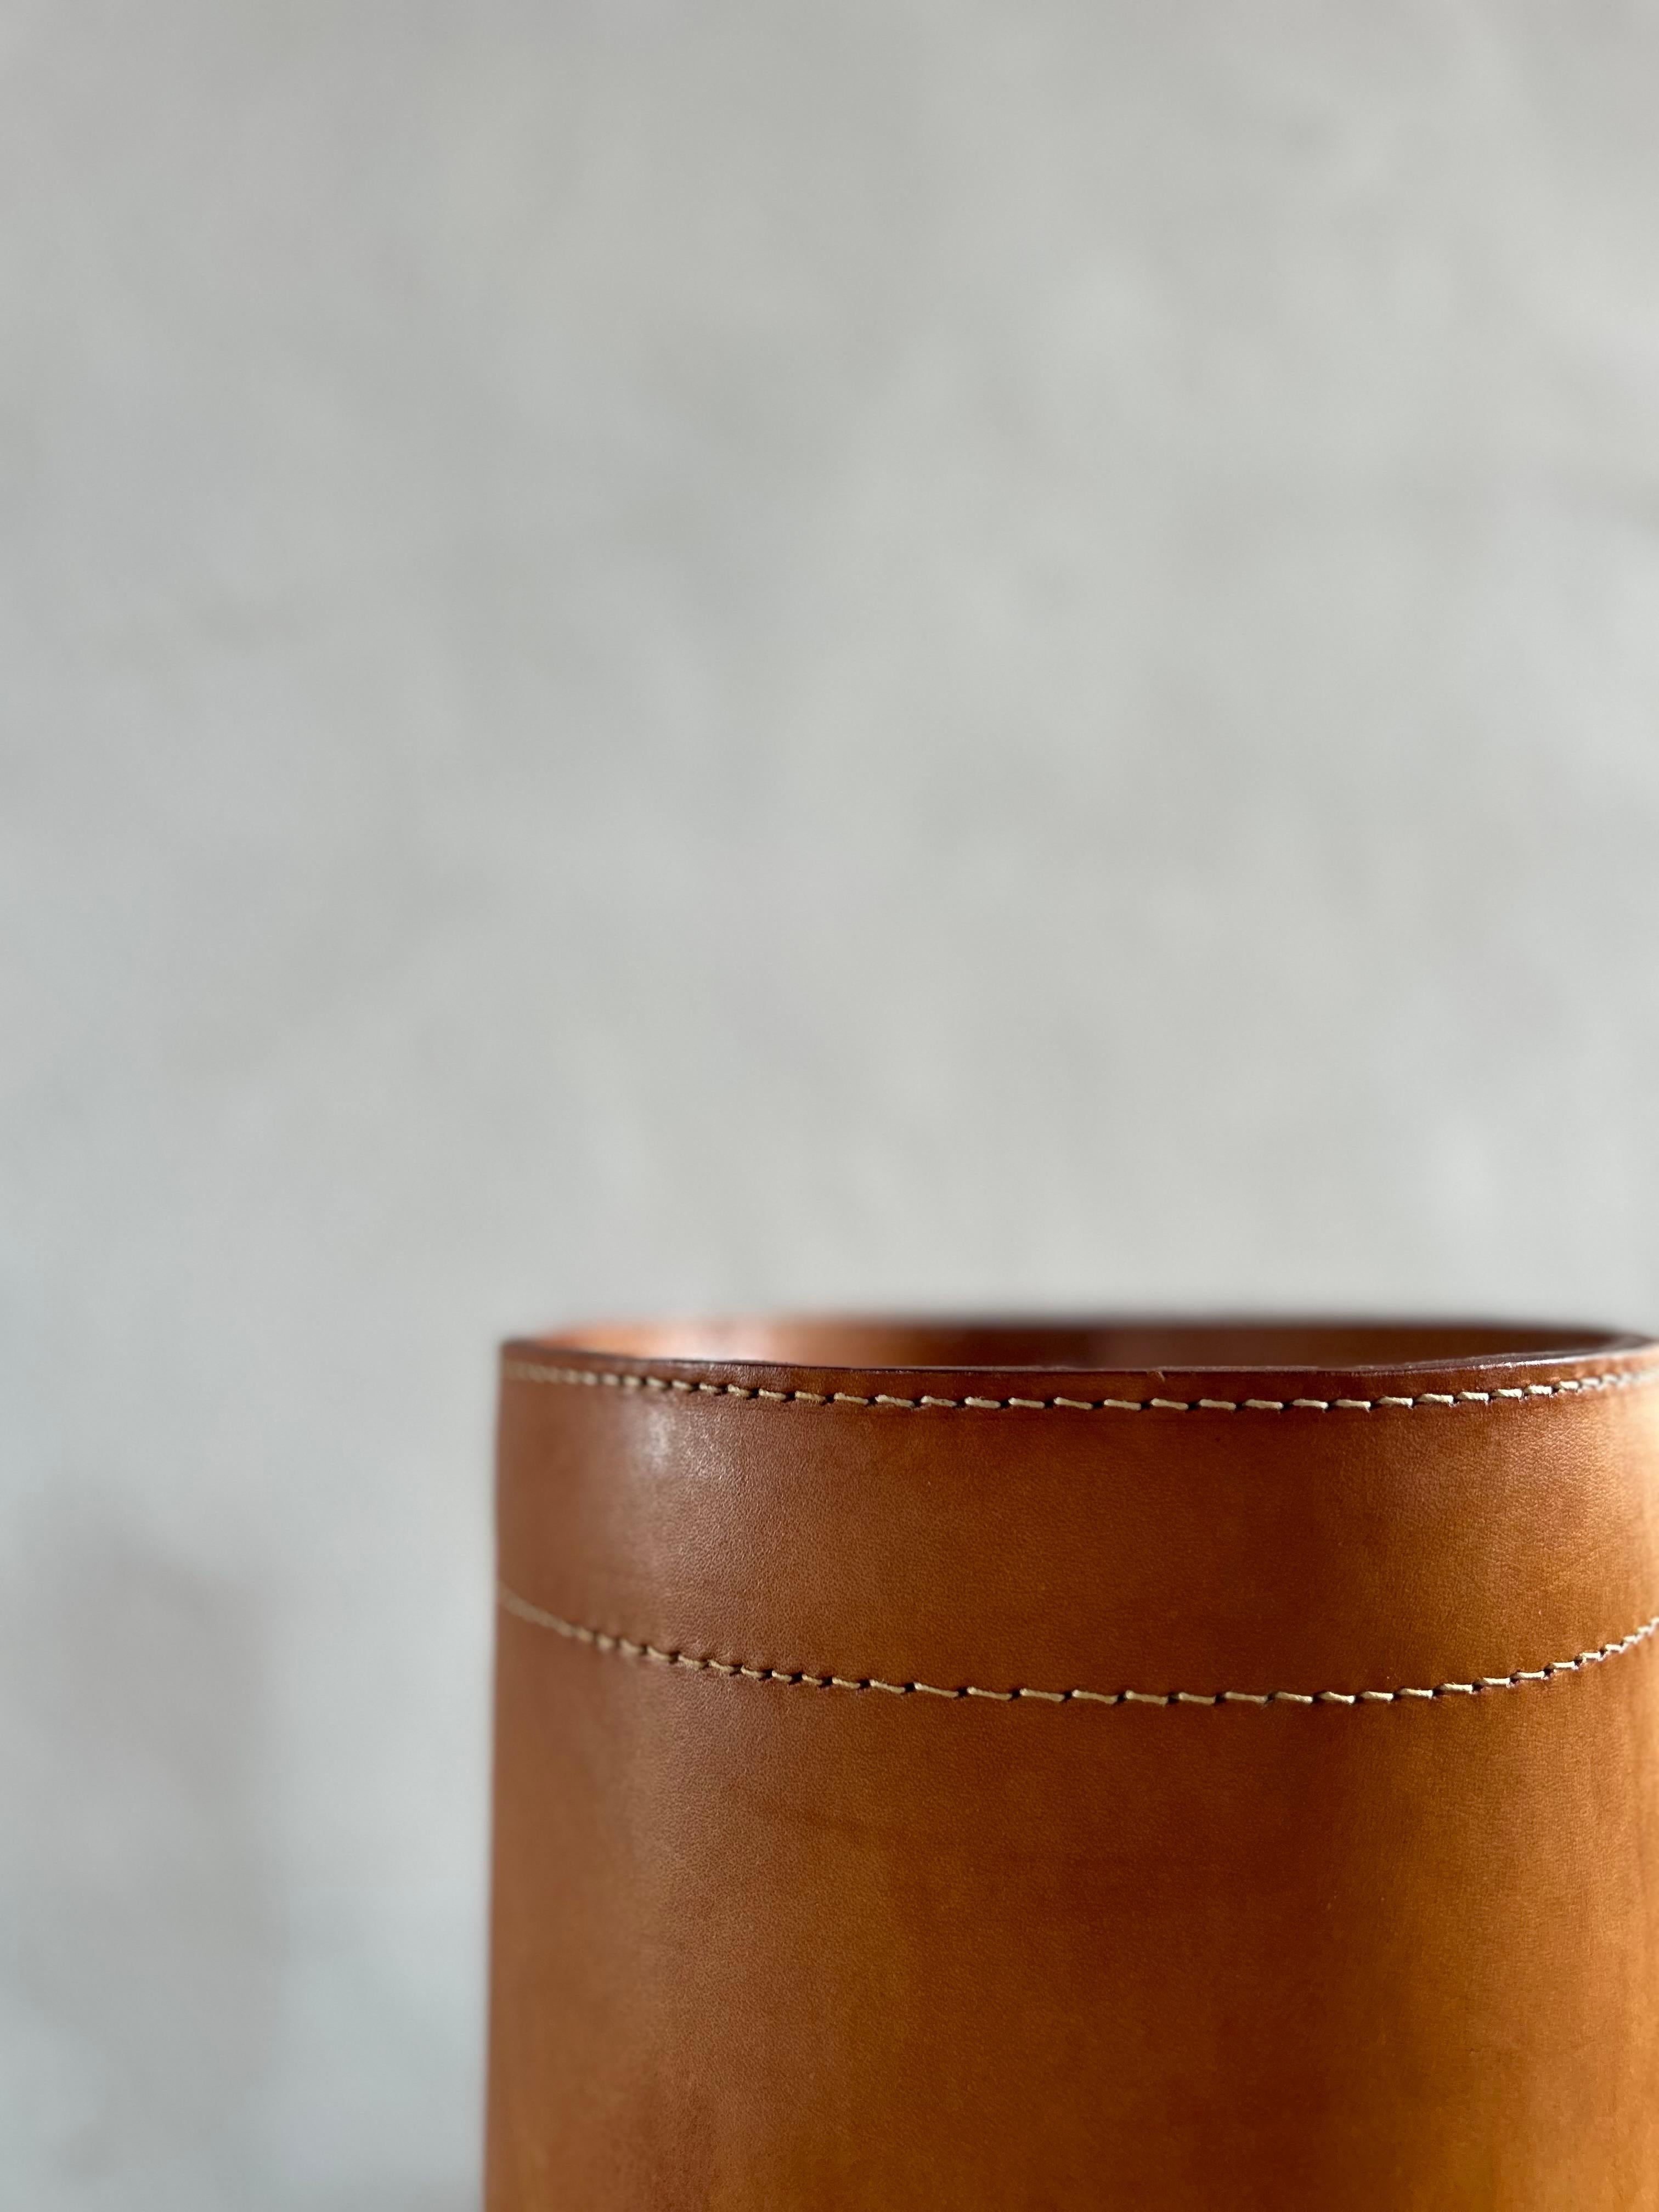 Wastepaper basket designed by Torben Ørskov in the 1960s. Renowned for his innovative designs and commitment to quality craftsmanship, Ørskov created pieces that seamlessly blended form and function, and this wastepaper basket is no